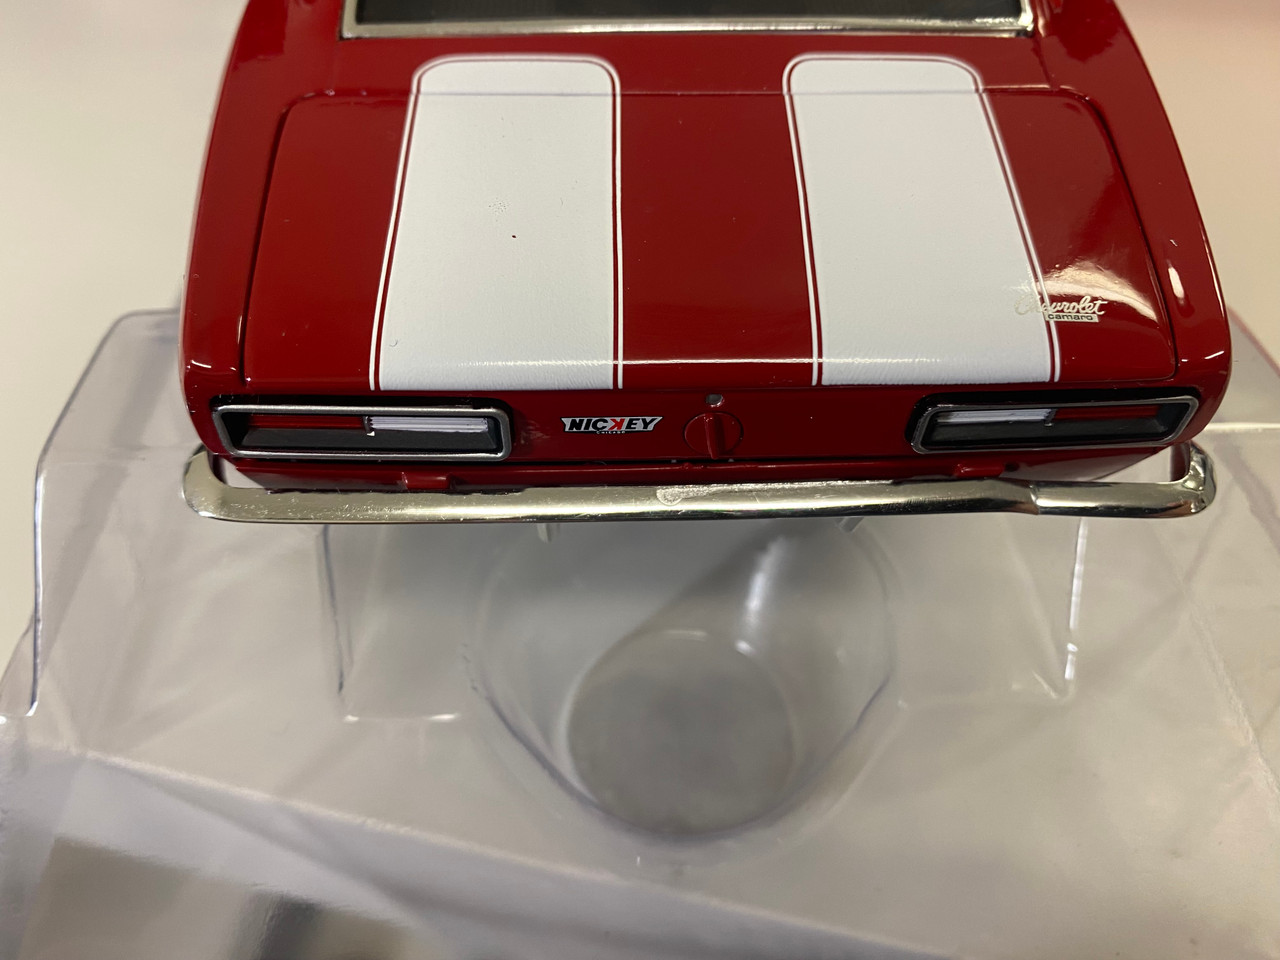 DEFECT 1/18 Auto World 1967 Chevrolet Camaro RS/SS Bolero (Red with White Stripe and White Interior) "Hemmings Motor News" Magazine Cover Car (March 2014) Diecast Car Model